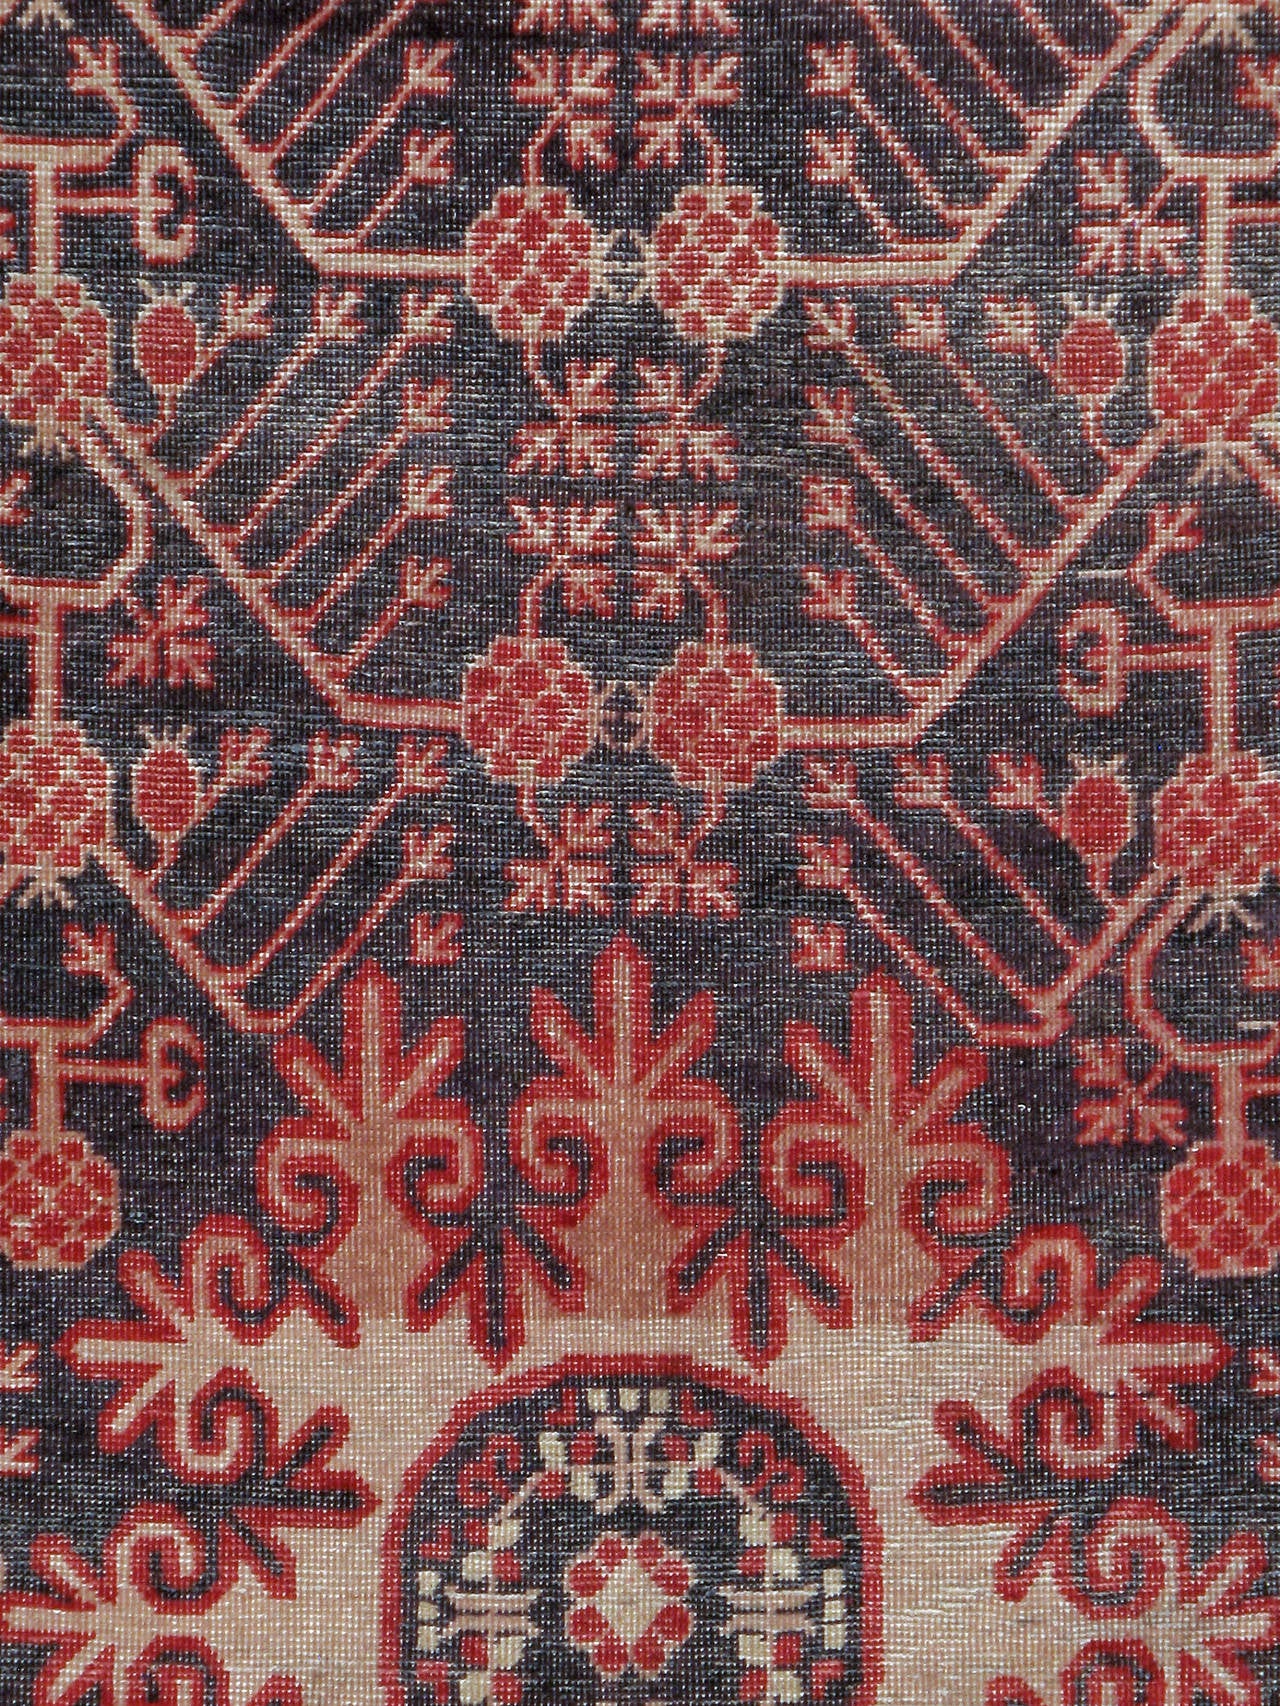 An antique East Turkestan Khotan carpet from the second quarter of the 20th century. A traditional pomegranate-vase design wraps around an unusual cloud medallion motif.

Measures: 5' 1